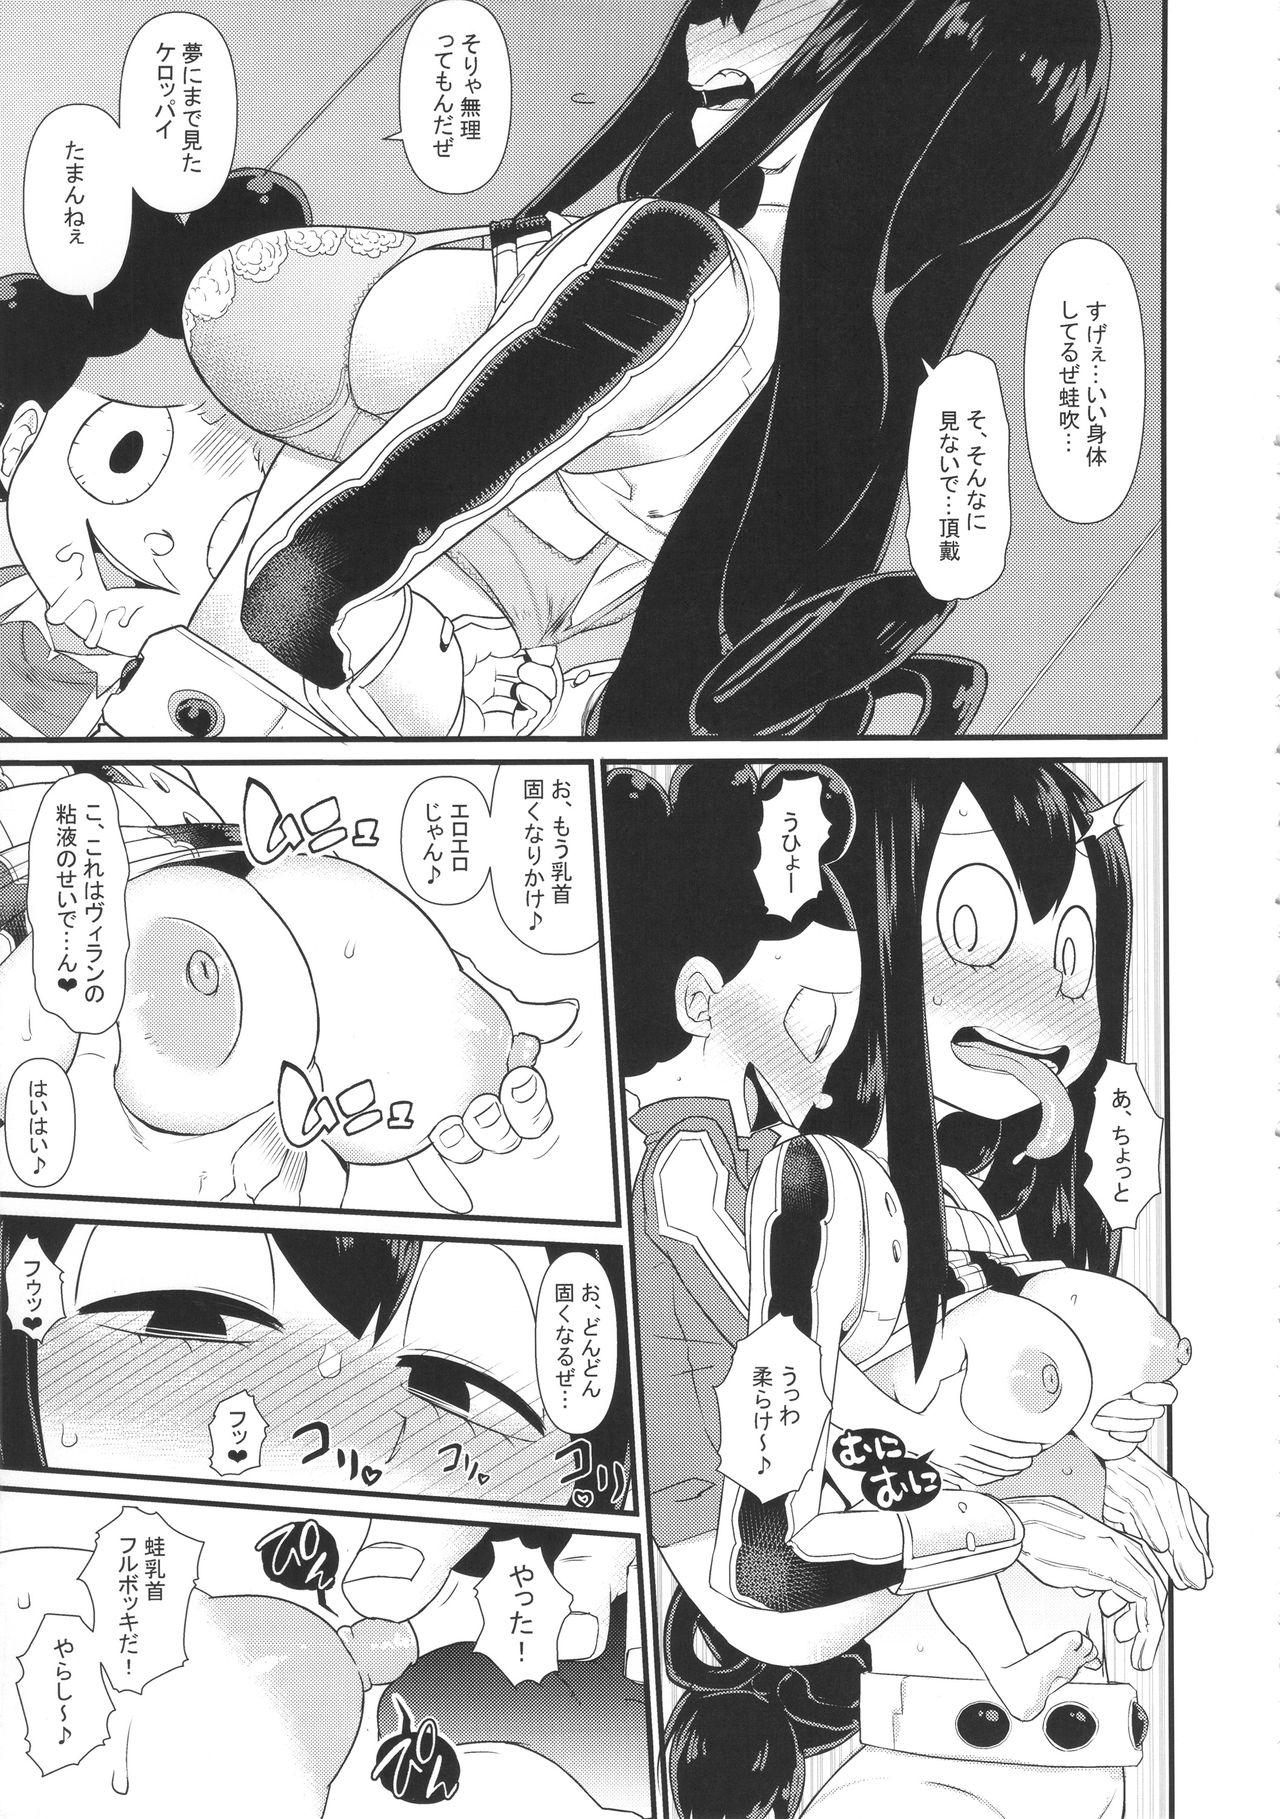 Stepsis FROPPY - My hero academia Nudist - Page 12